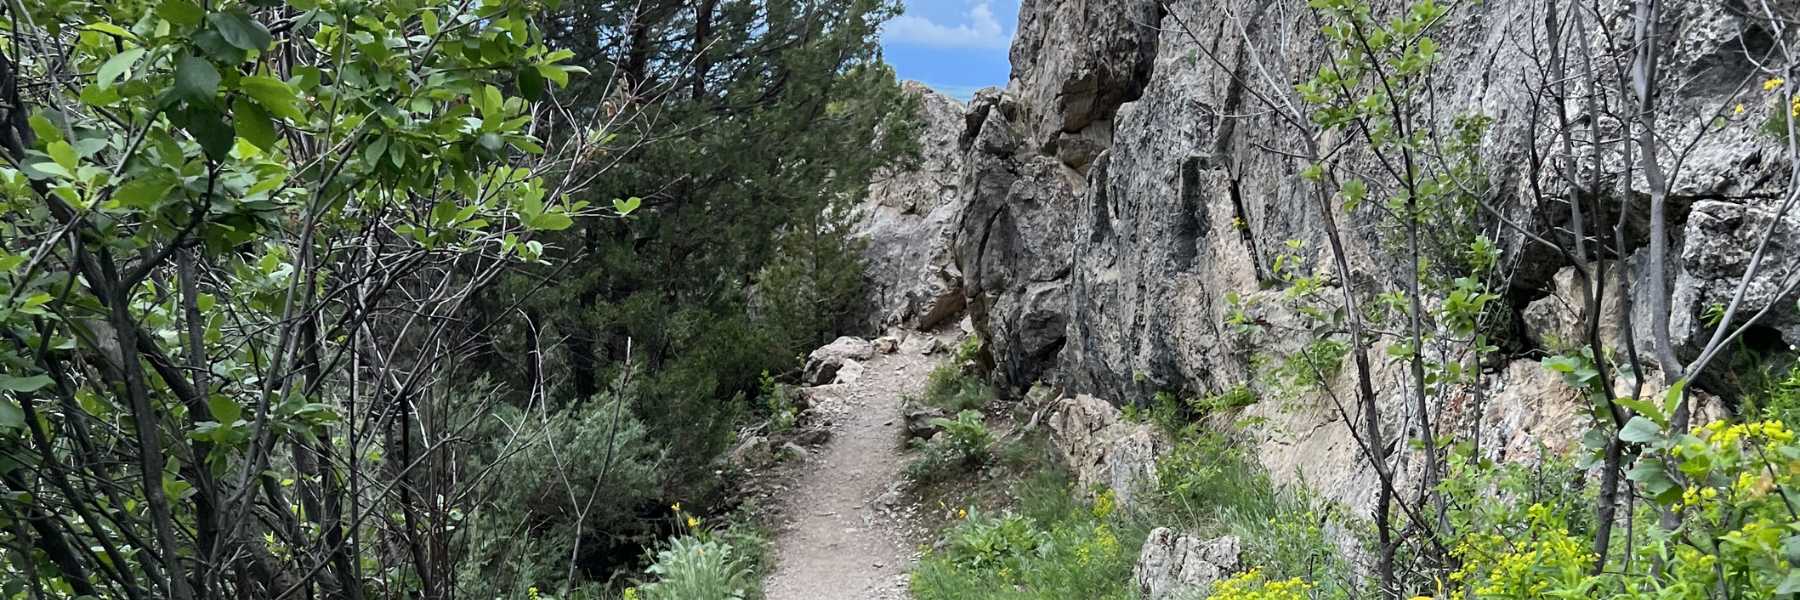 The College M Trail - Easy Hikes In Bozeman